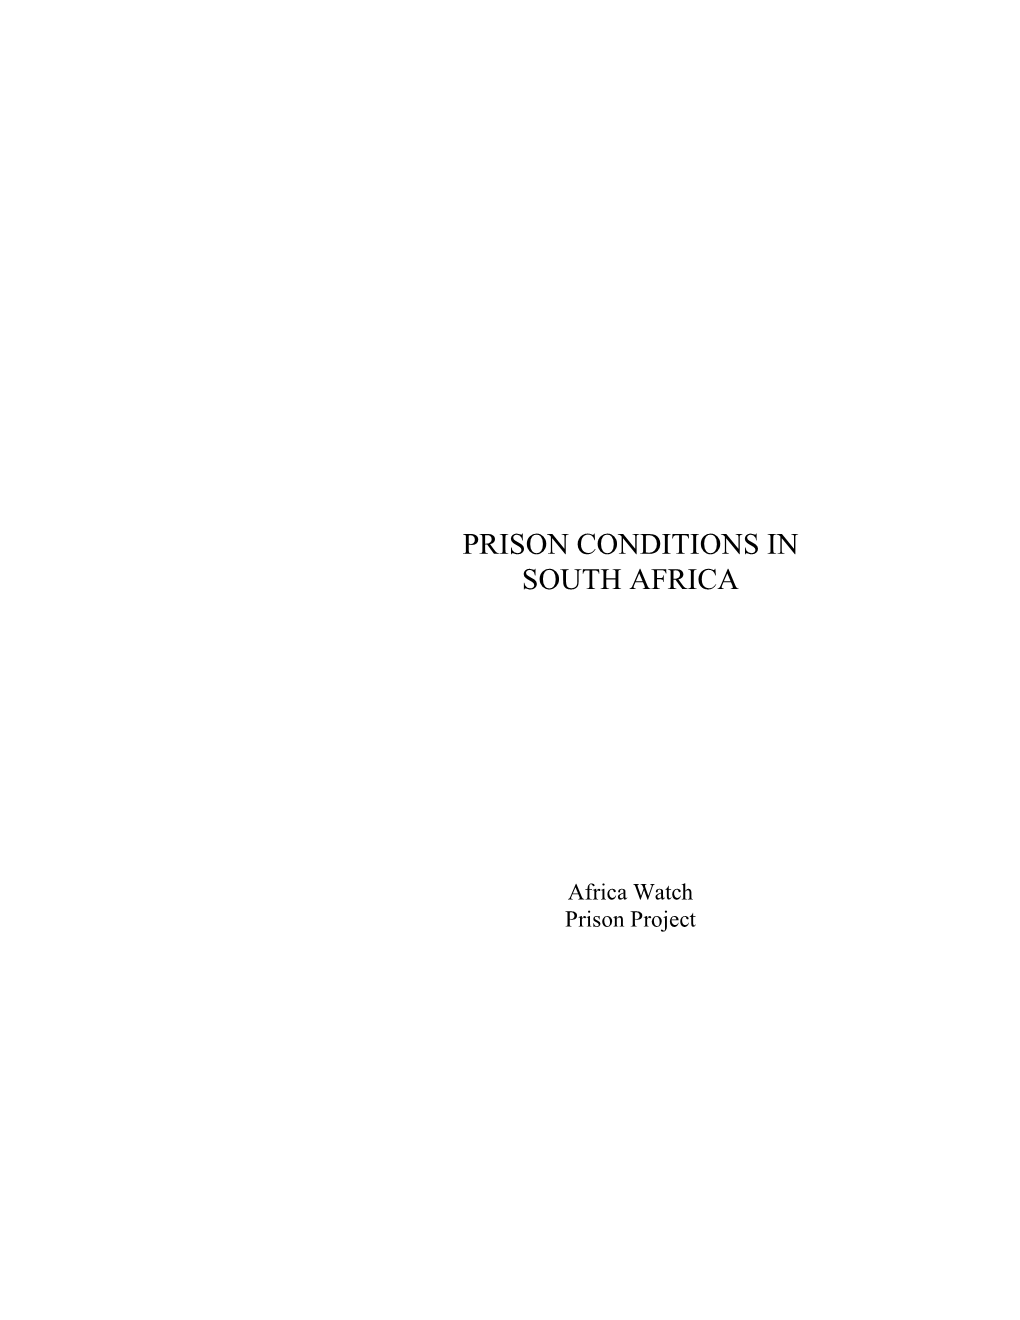 Prison Conditions in South Africa